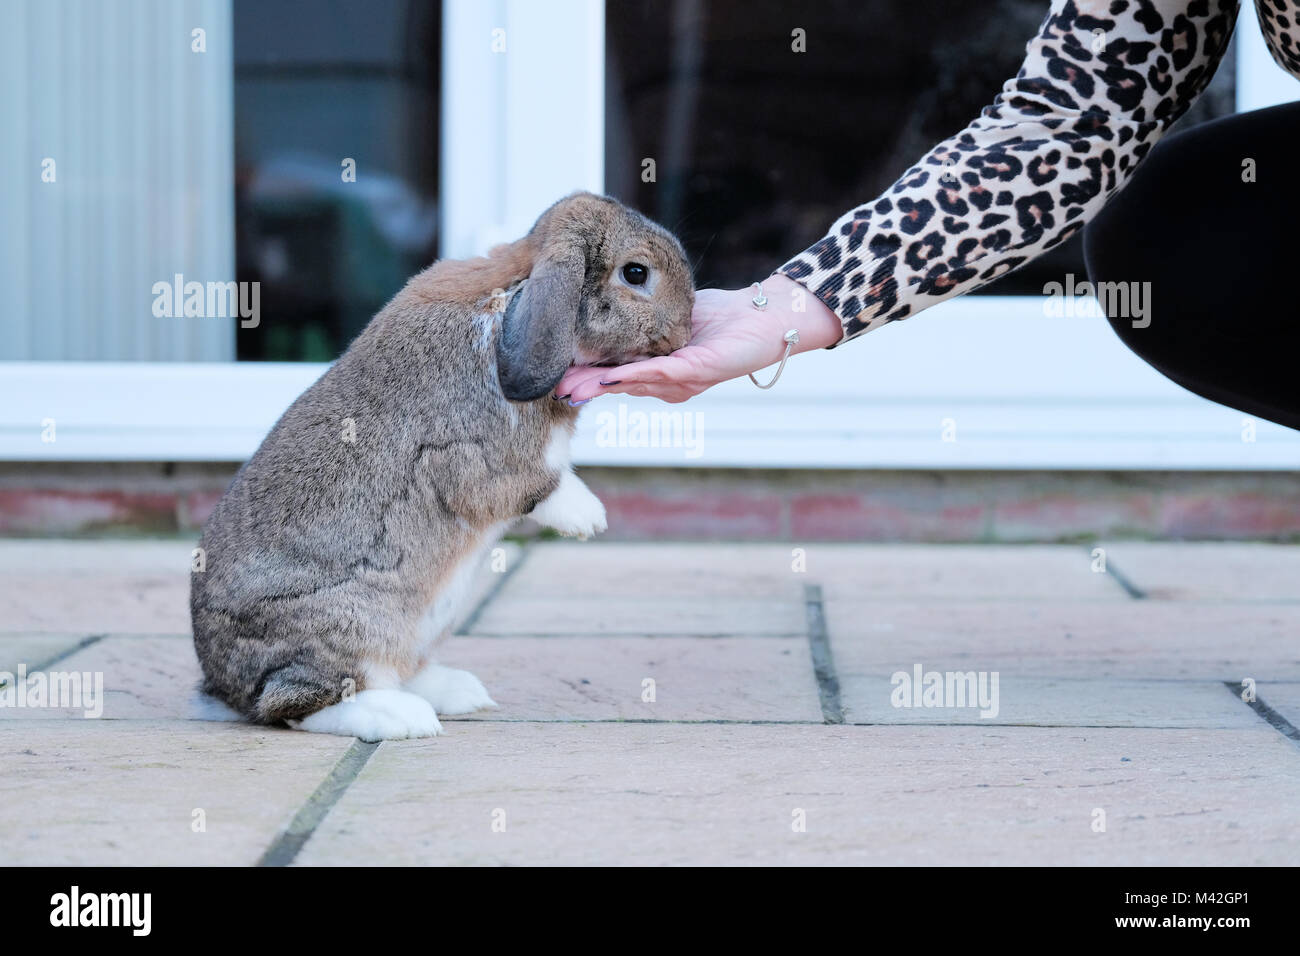 A tame Dwarf Lop rabbit, pet, rabbit eats a treat from its owners hand. the rabbit is totally relaxed and sat up on its hind legs to eat the treats Stock Photo